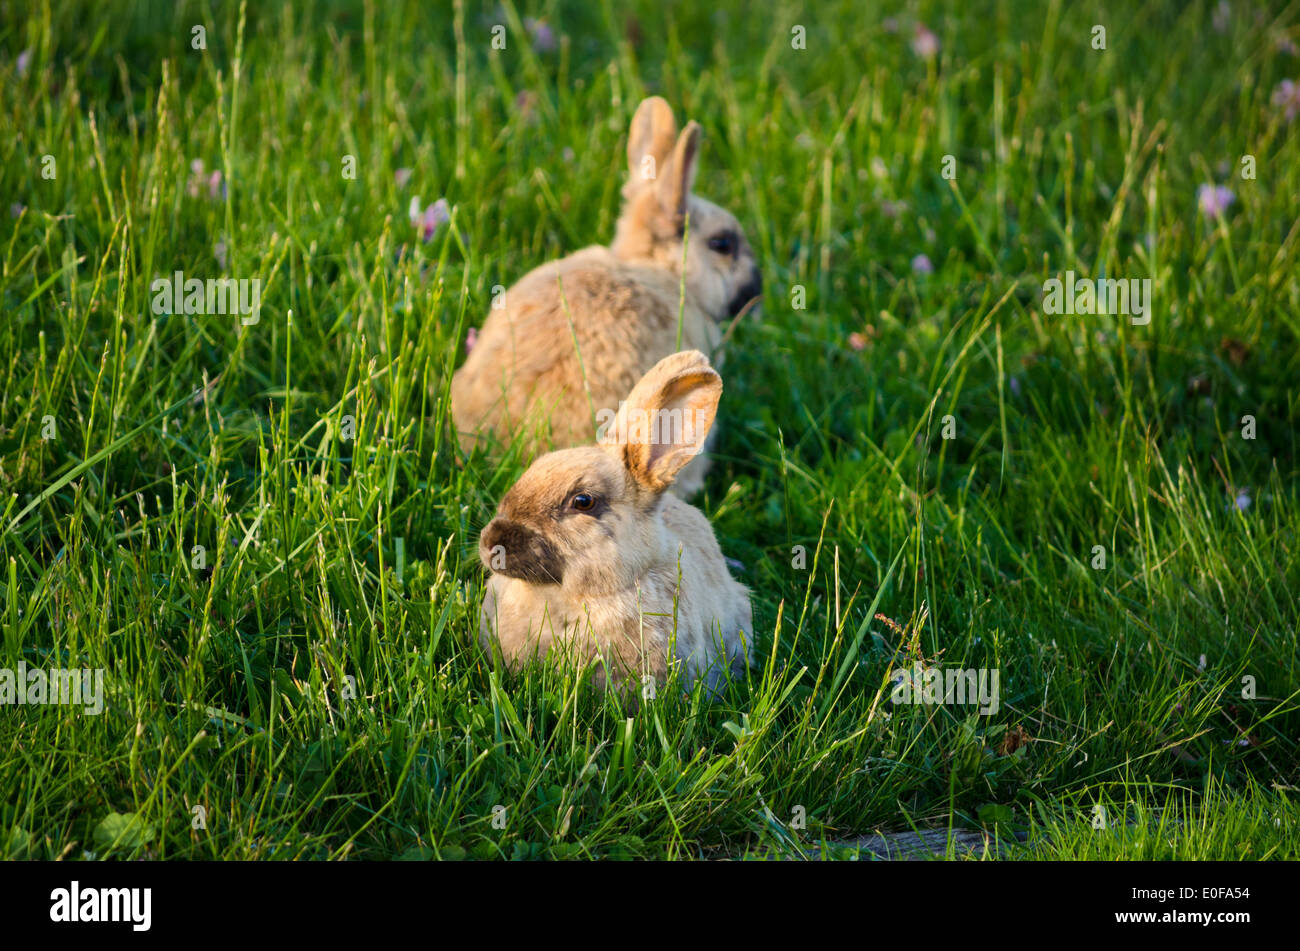 two-cute-bunnies-or-rabbits-in-the-grass